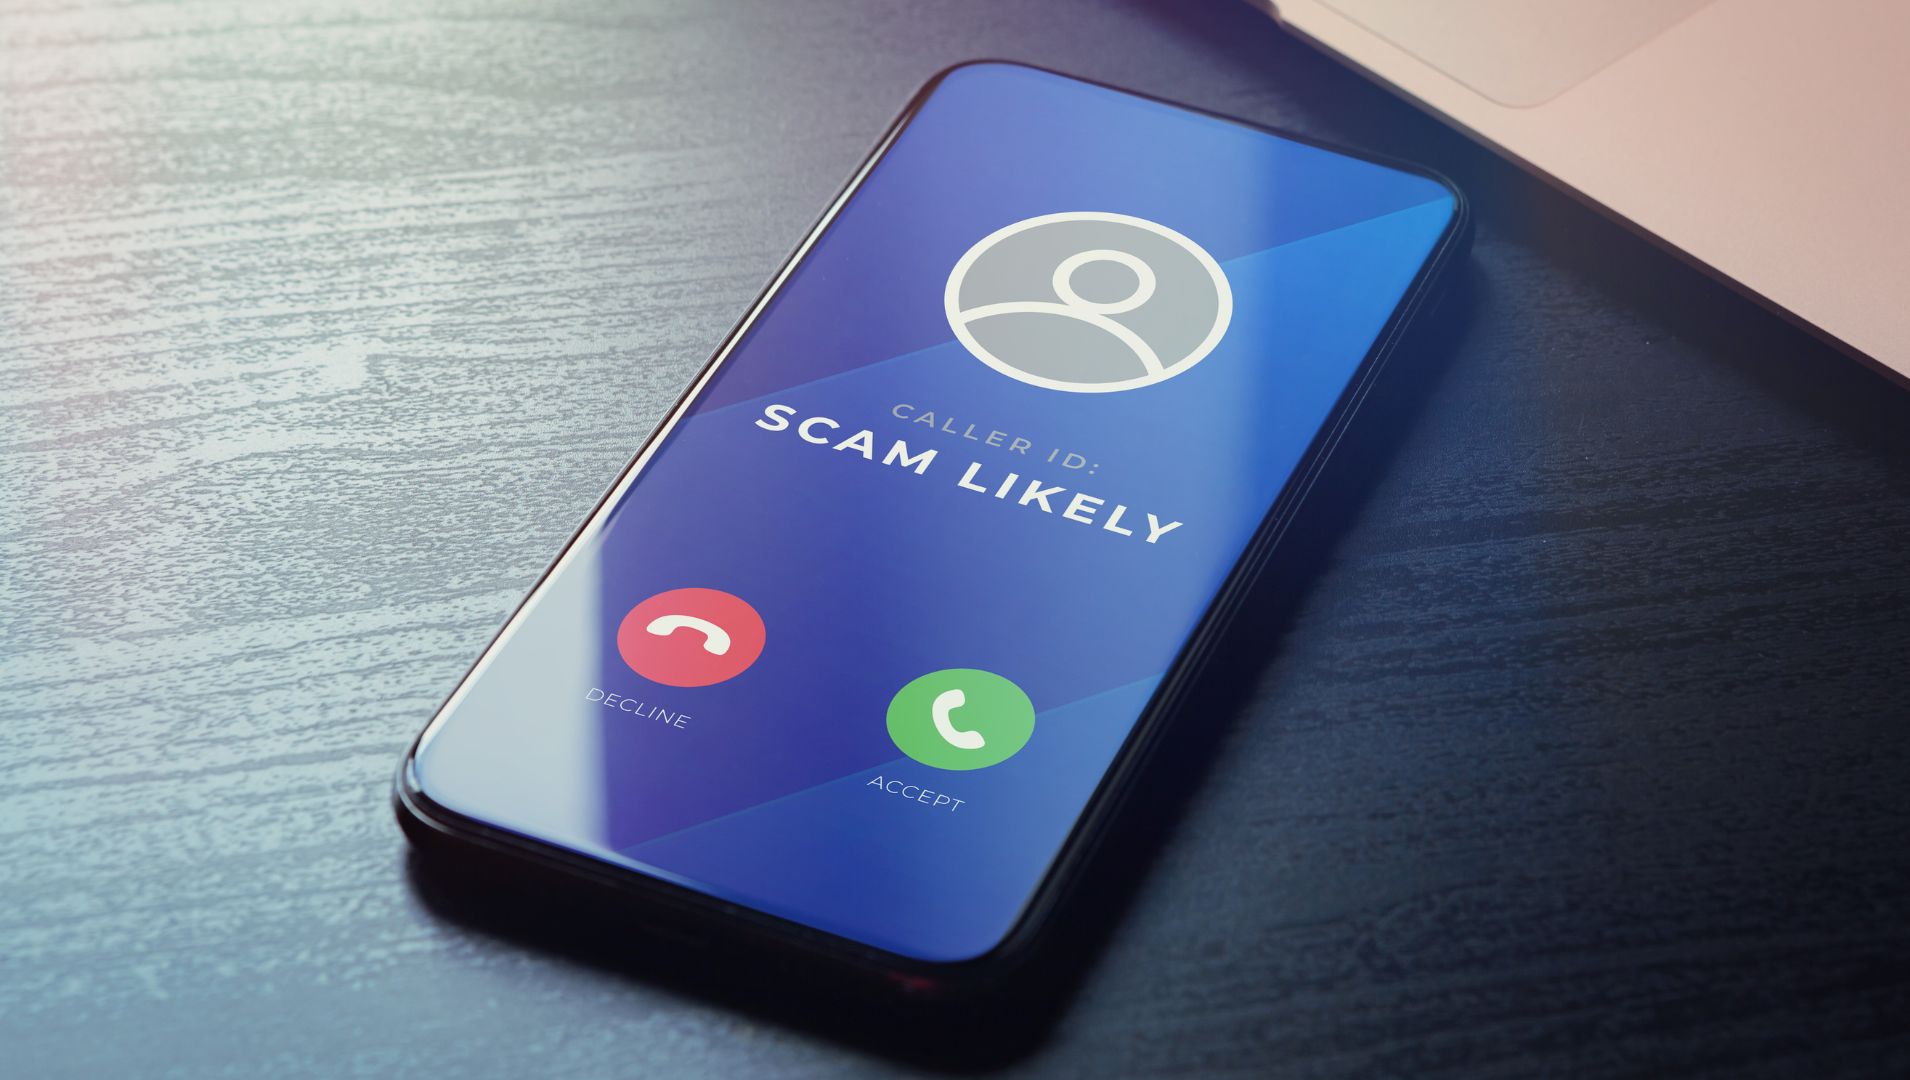 A phone with a scam caller identified and the option to accept or decline the call.